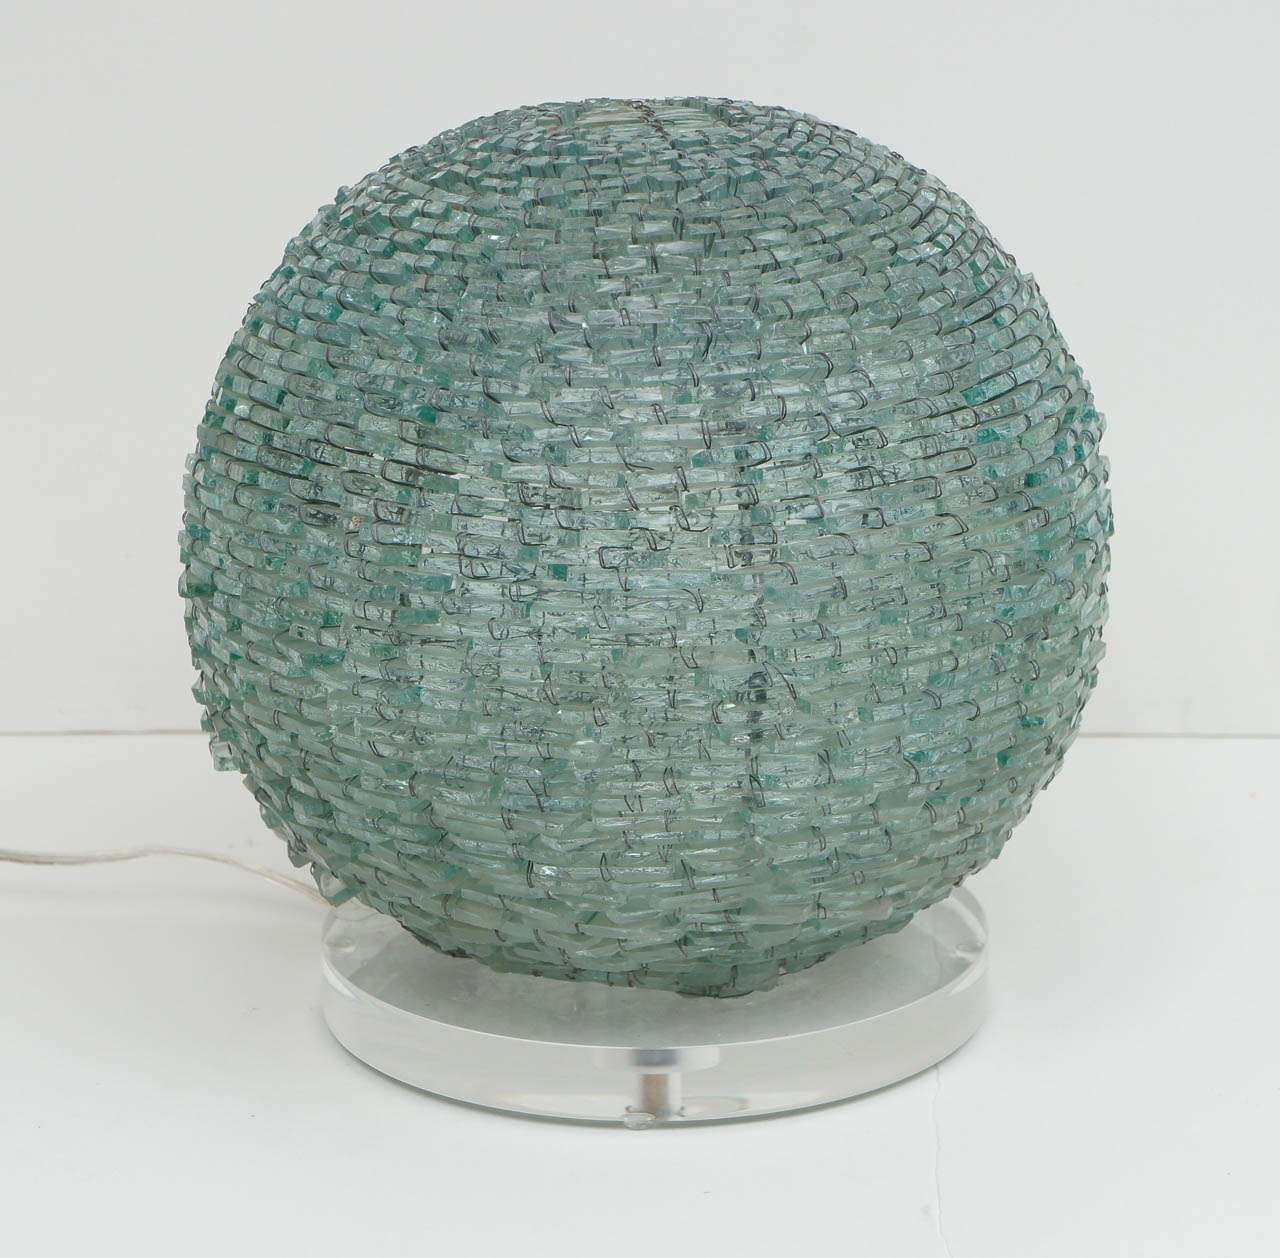 A spectacular spherical table lamp created with 1/4 inch pieces of glass. 
A wire frame sits on a Lucite base.